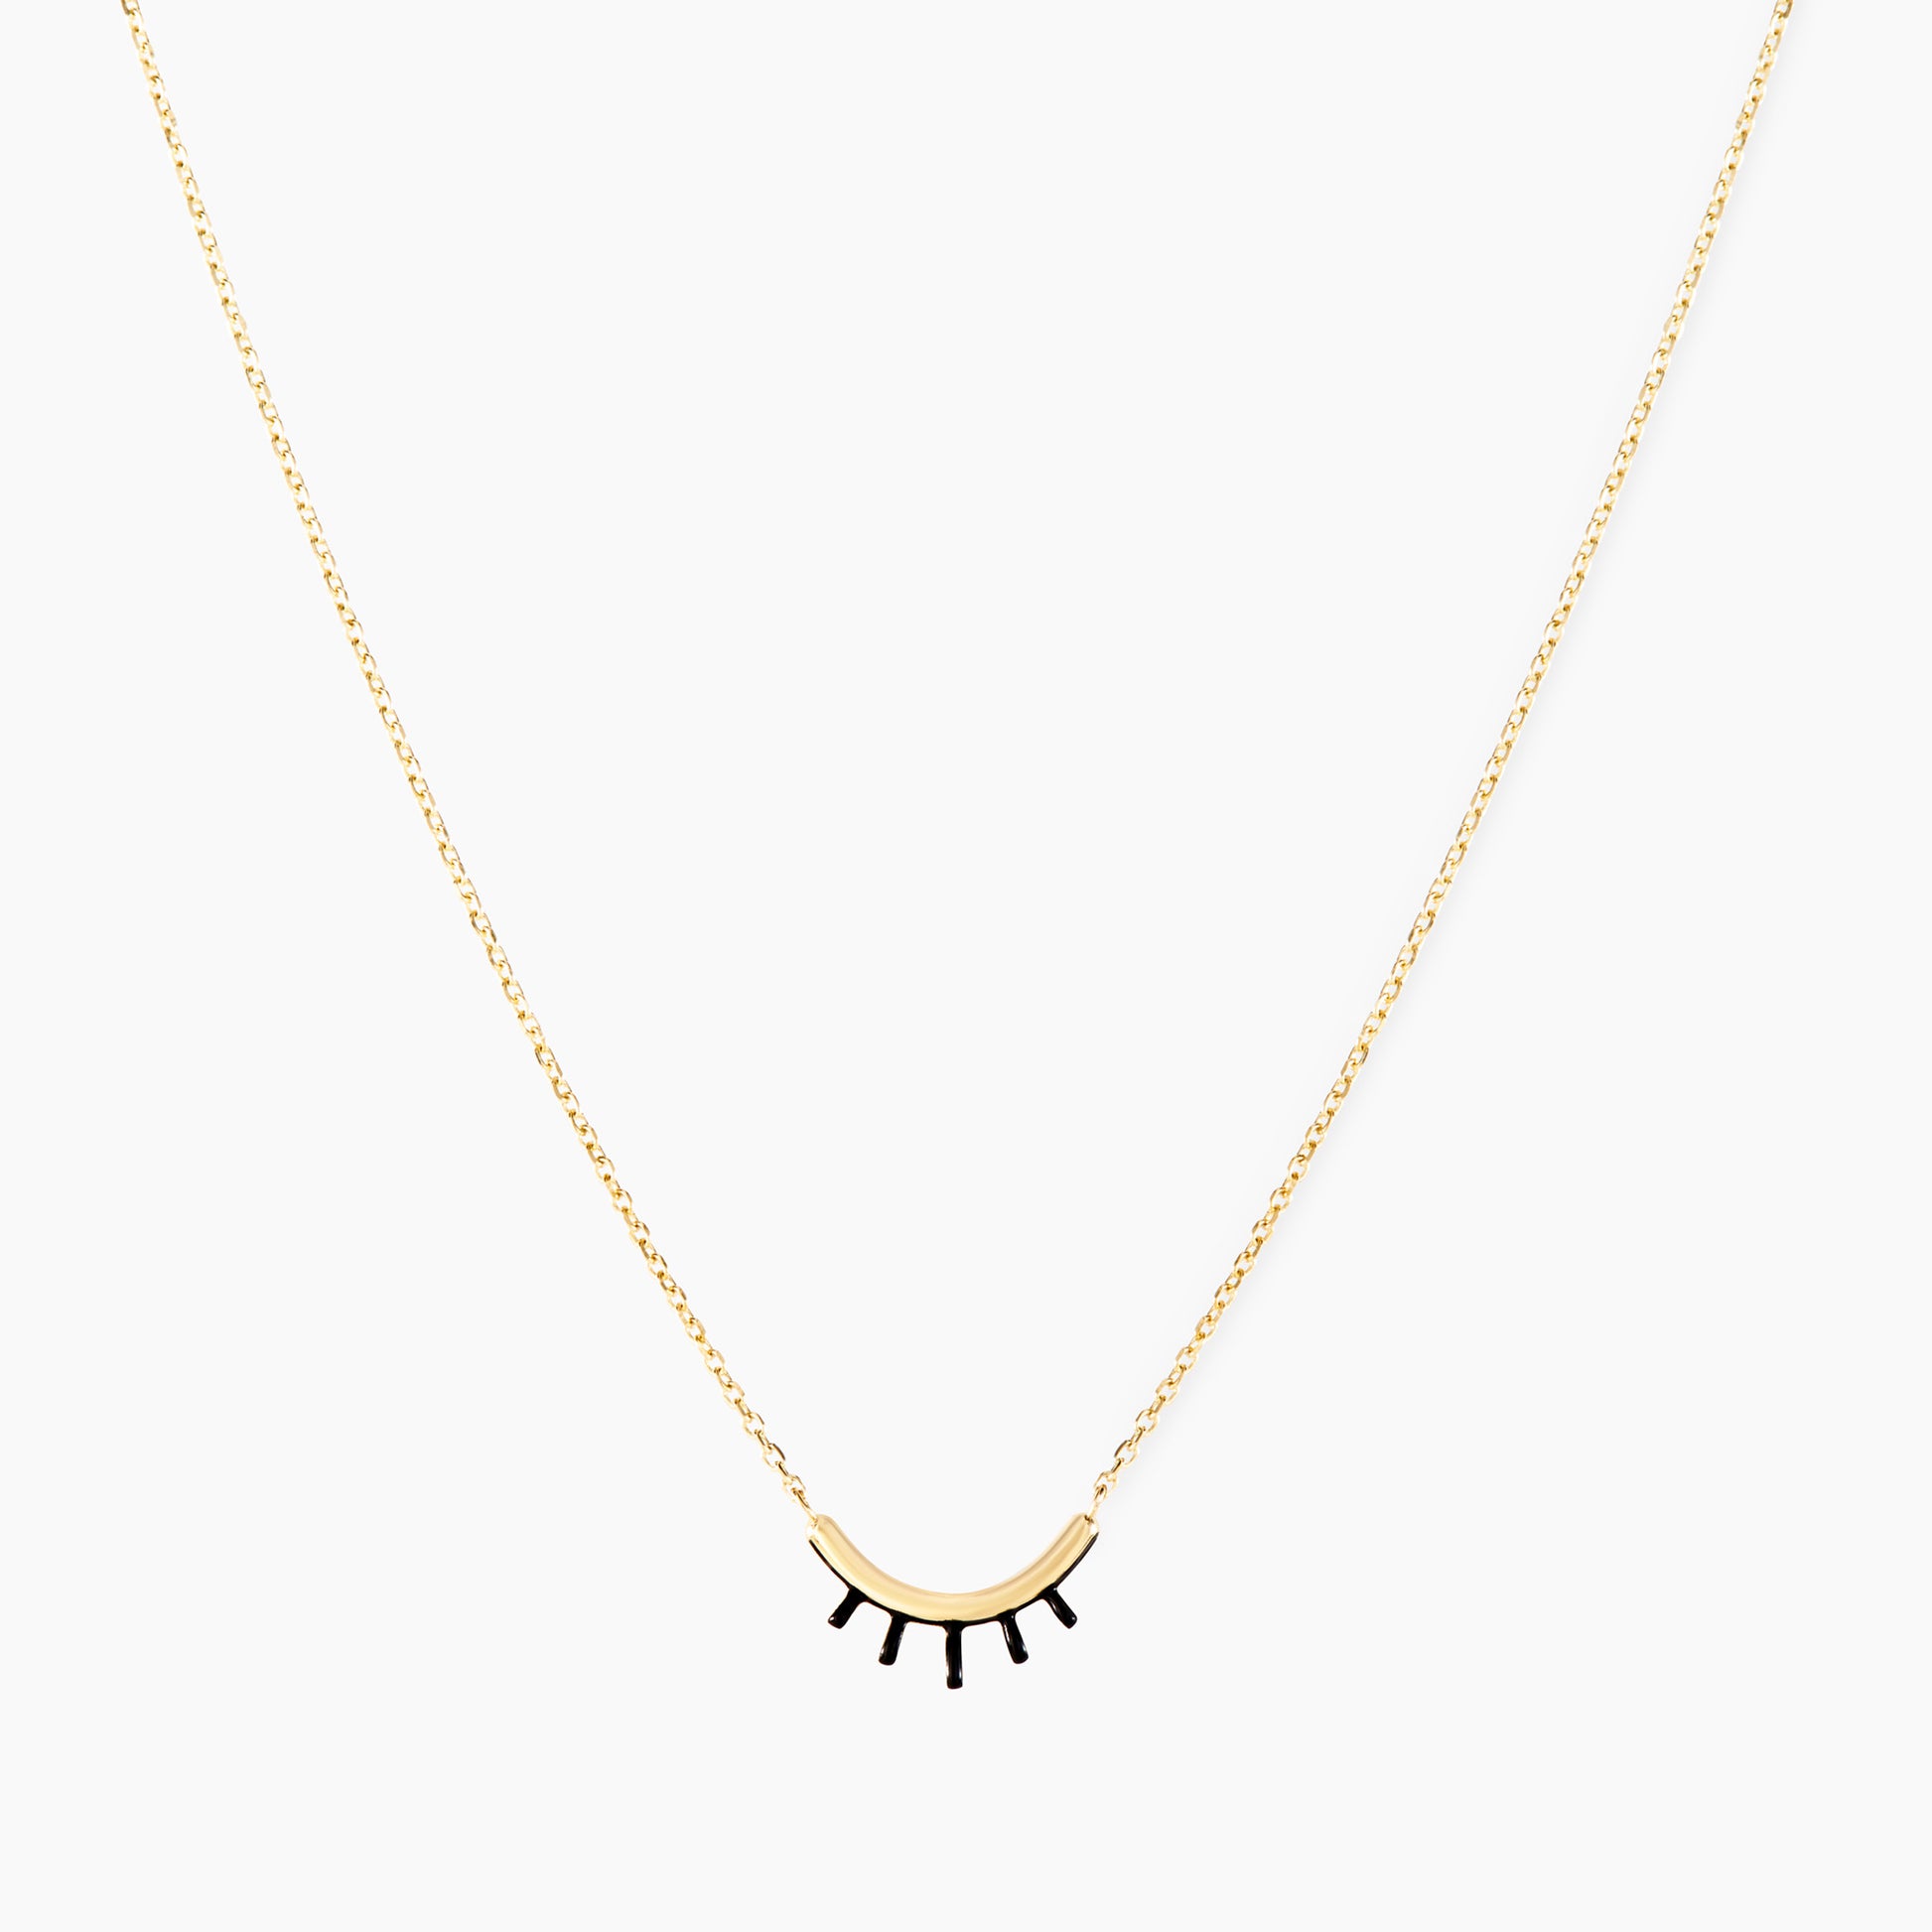 Good night darling gold and black enamel necklace